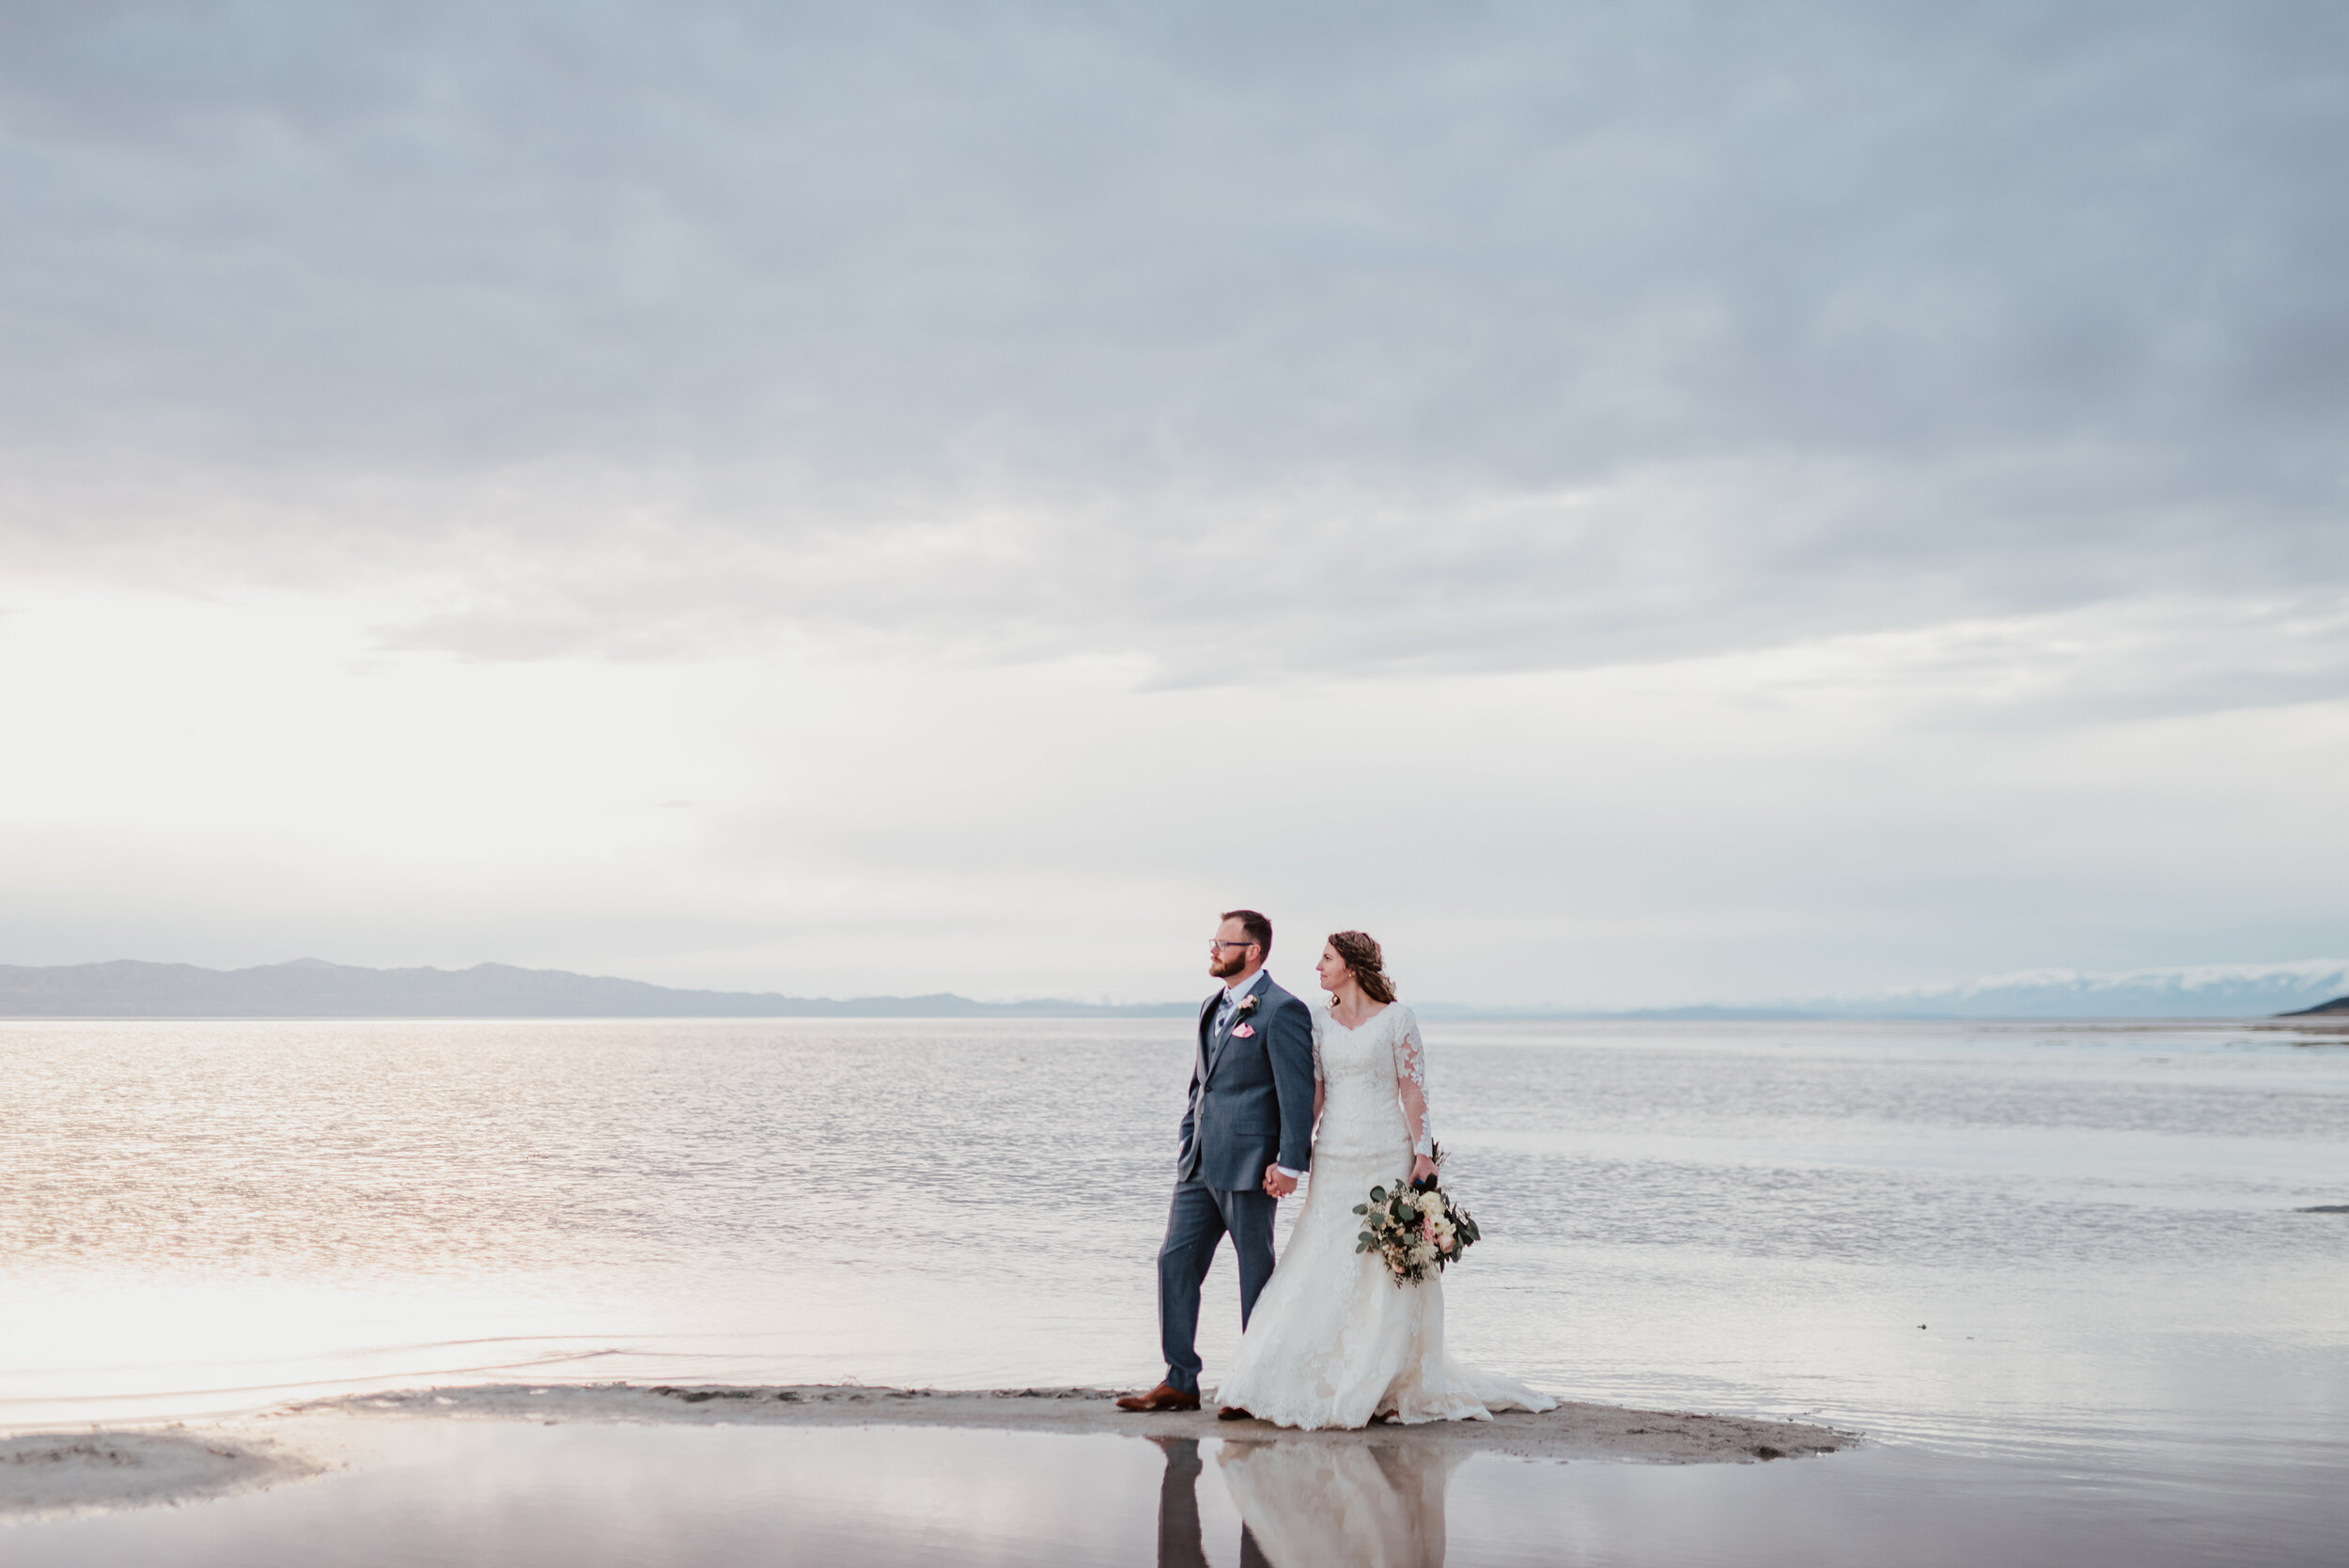  Walking along the sand as the sun set behind the Spiral Jetty near the Great Salt Lake. wedding formal photoshoot in Spiral Jetty Northern Utah Great Salt Lake photography wedding formals natural photo aesthetic bride and groom #spiraljetty #utahphotography #weddingformals #gettingmarried #weddingattire #utahwedding #greatoutdoorswedding #weddingformalsphotoshoot #naturalbeauty 